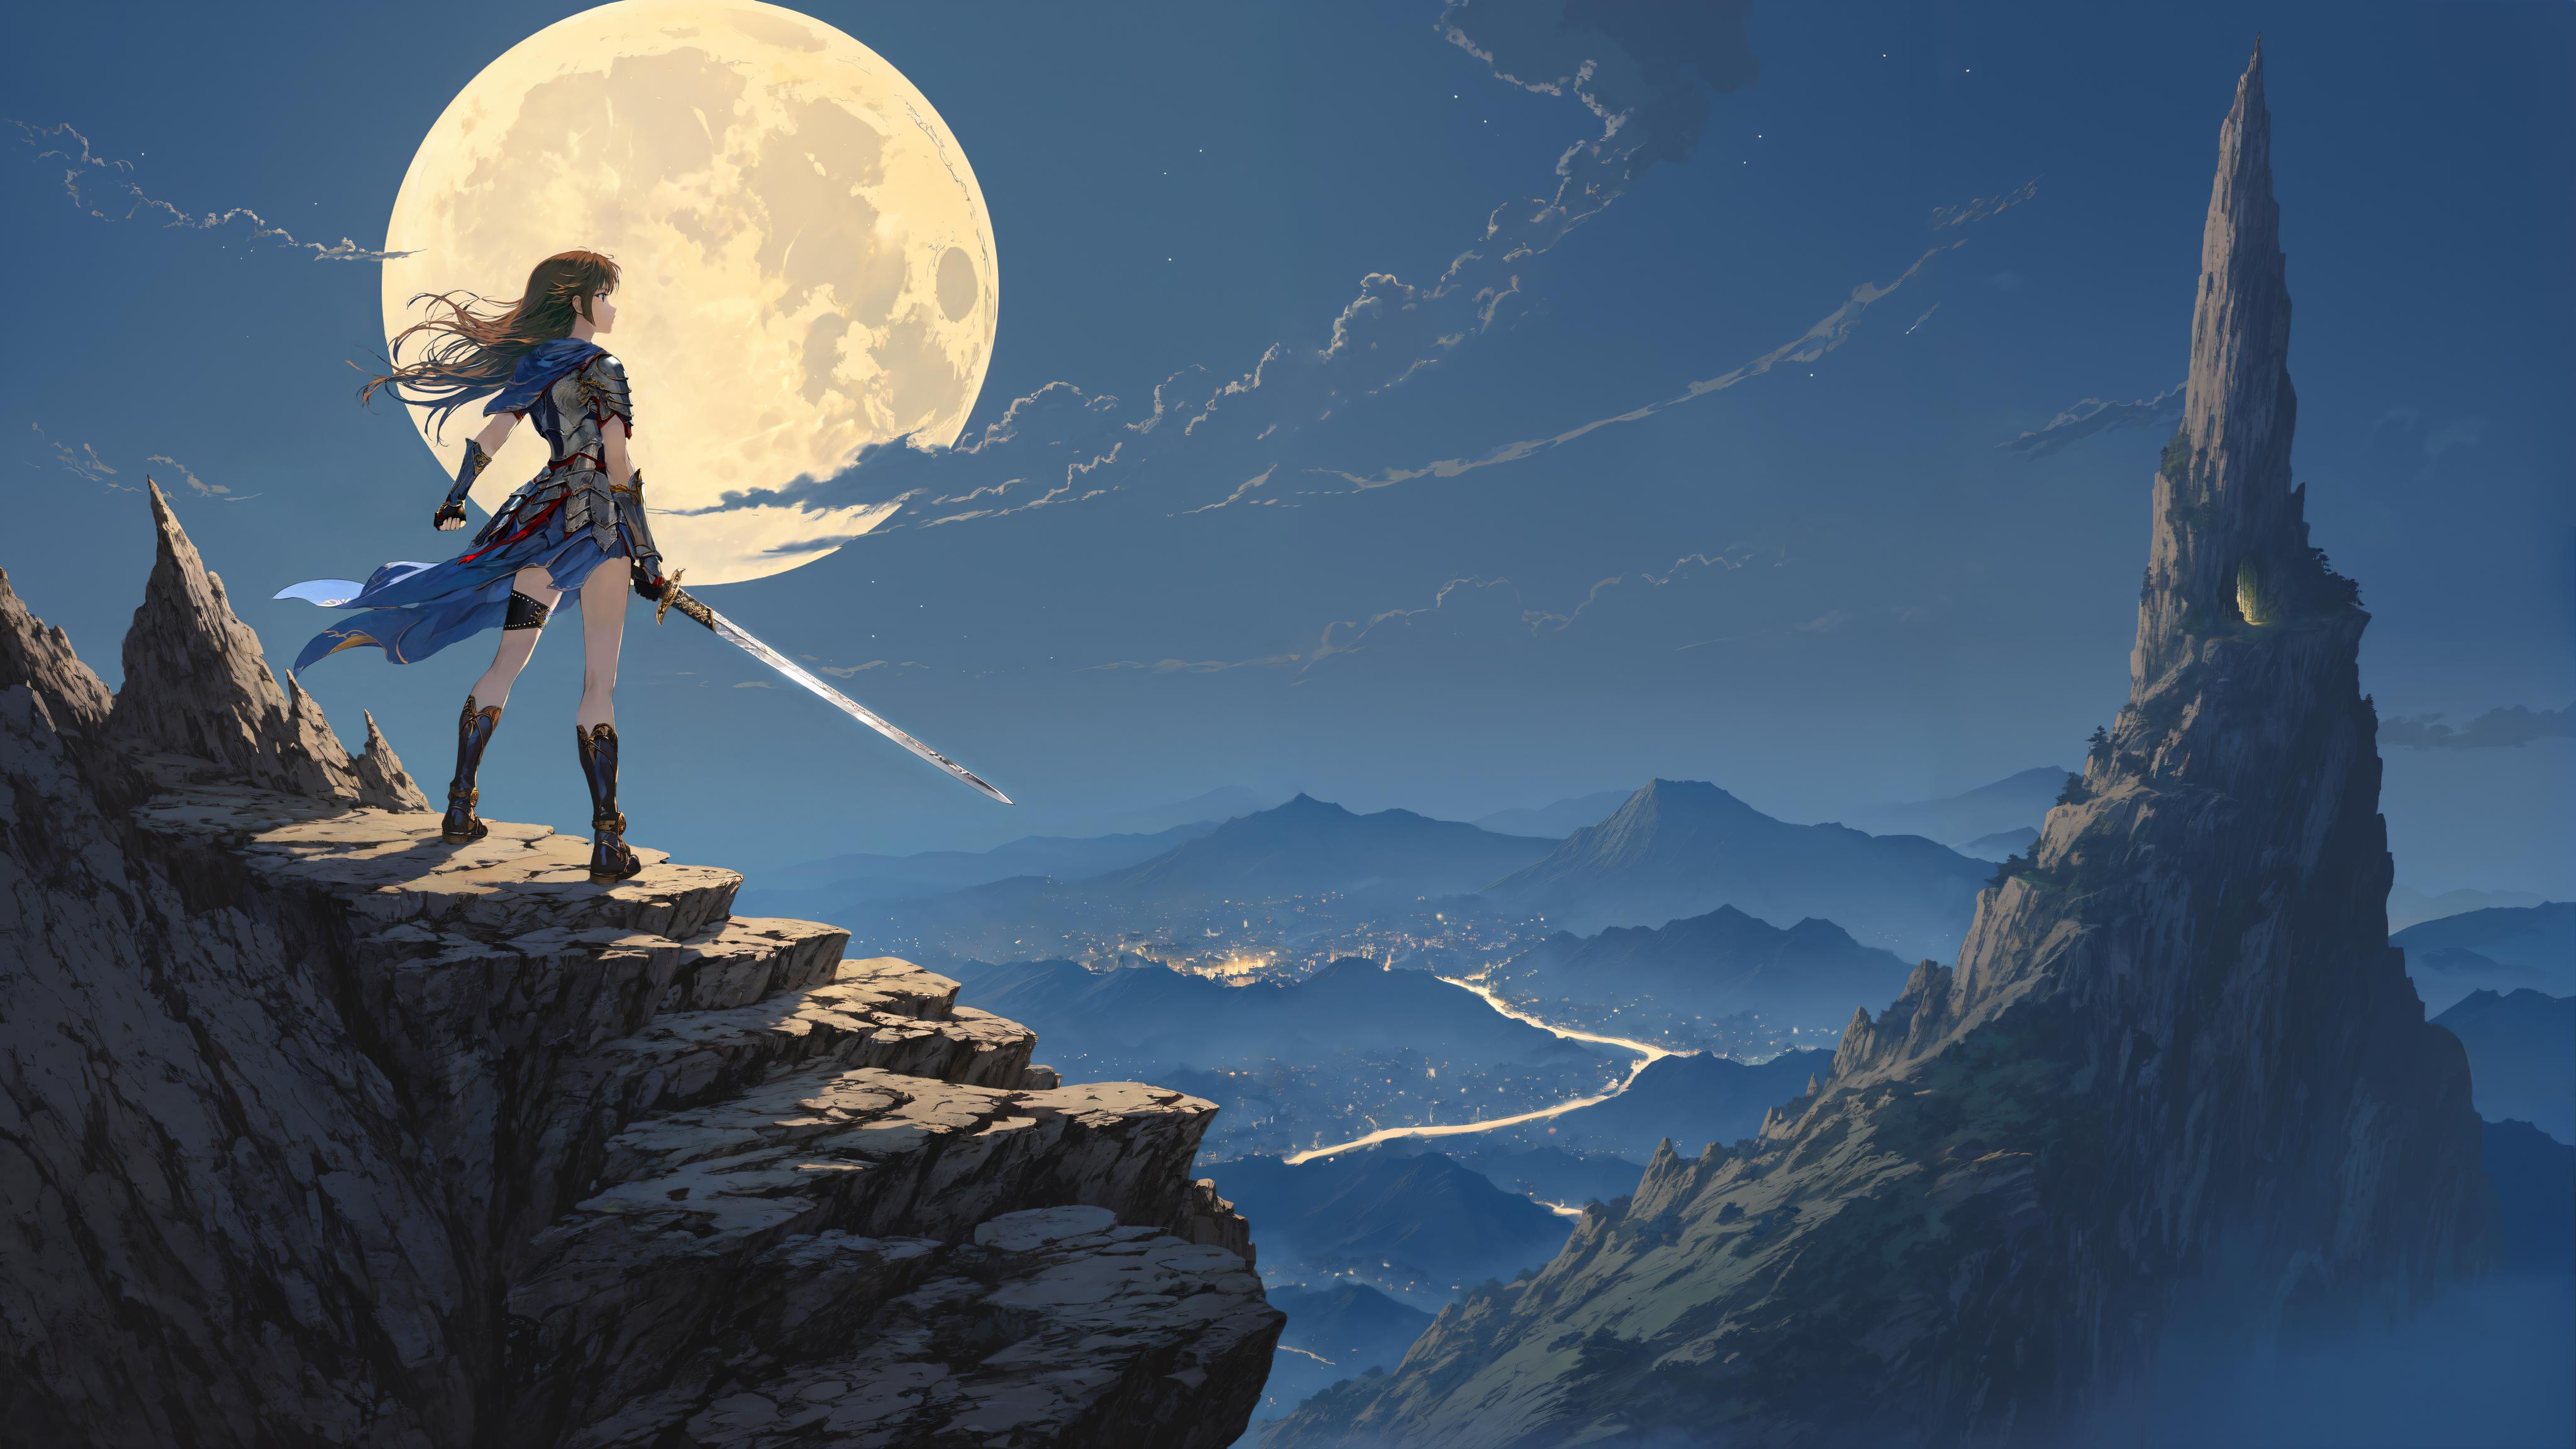 A woman standing on a rocky mountain top holding a sword, with the moon in the background.